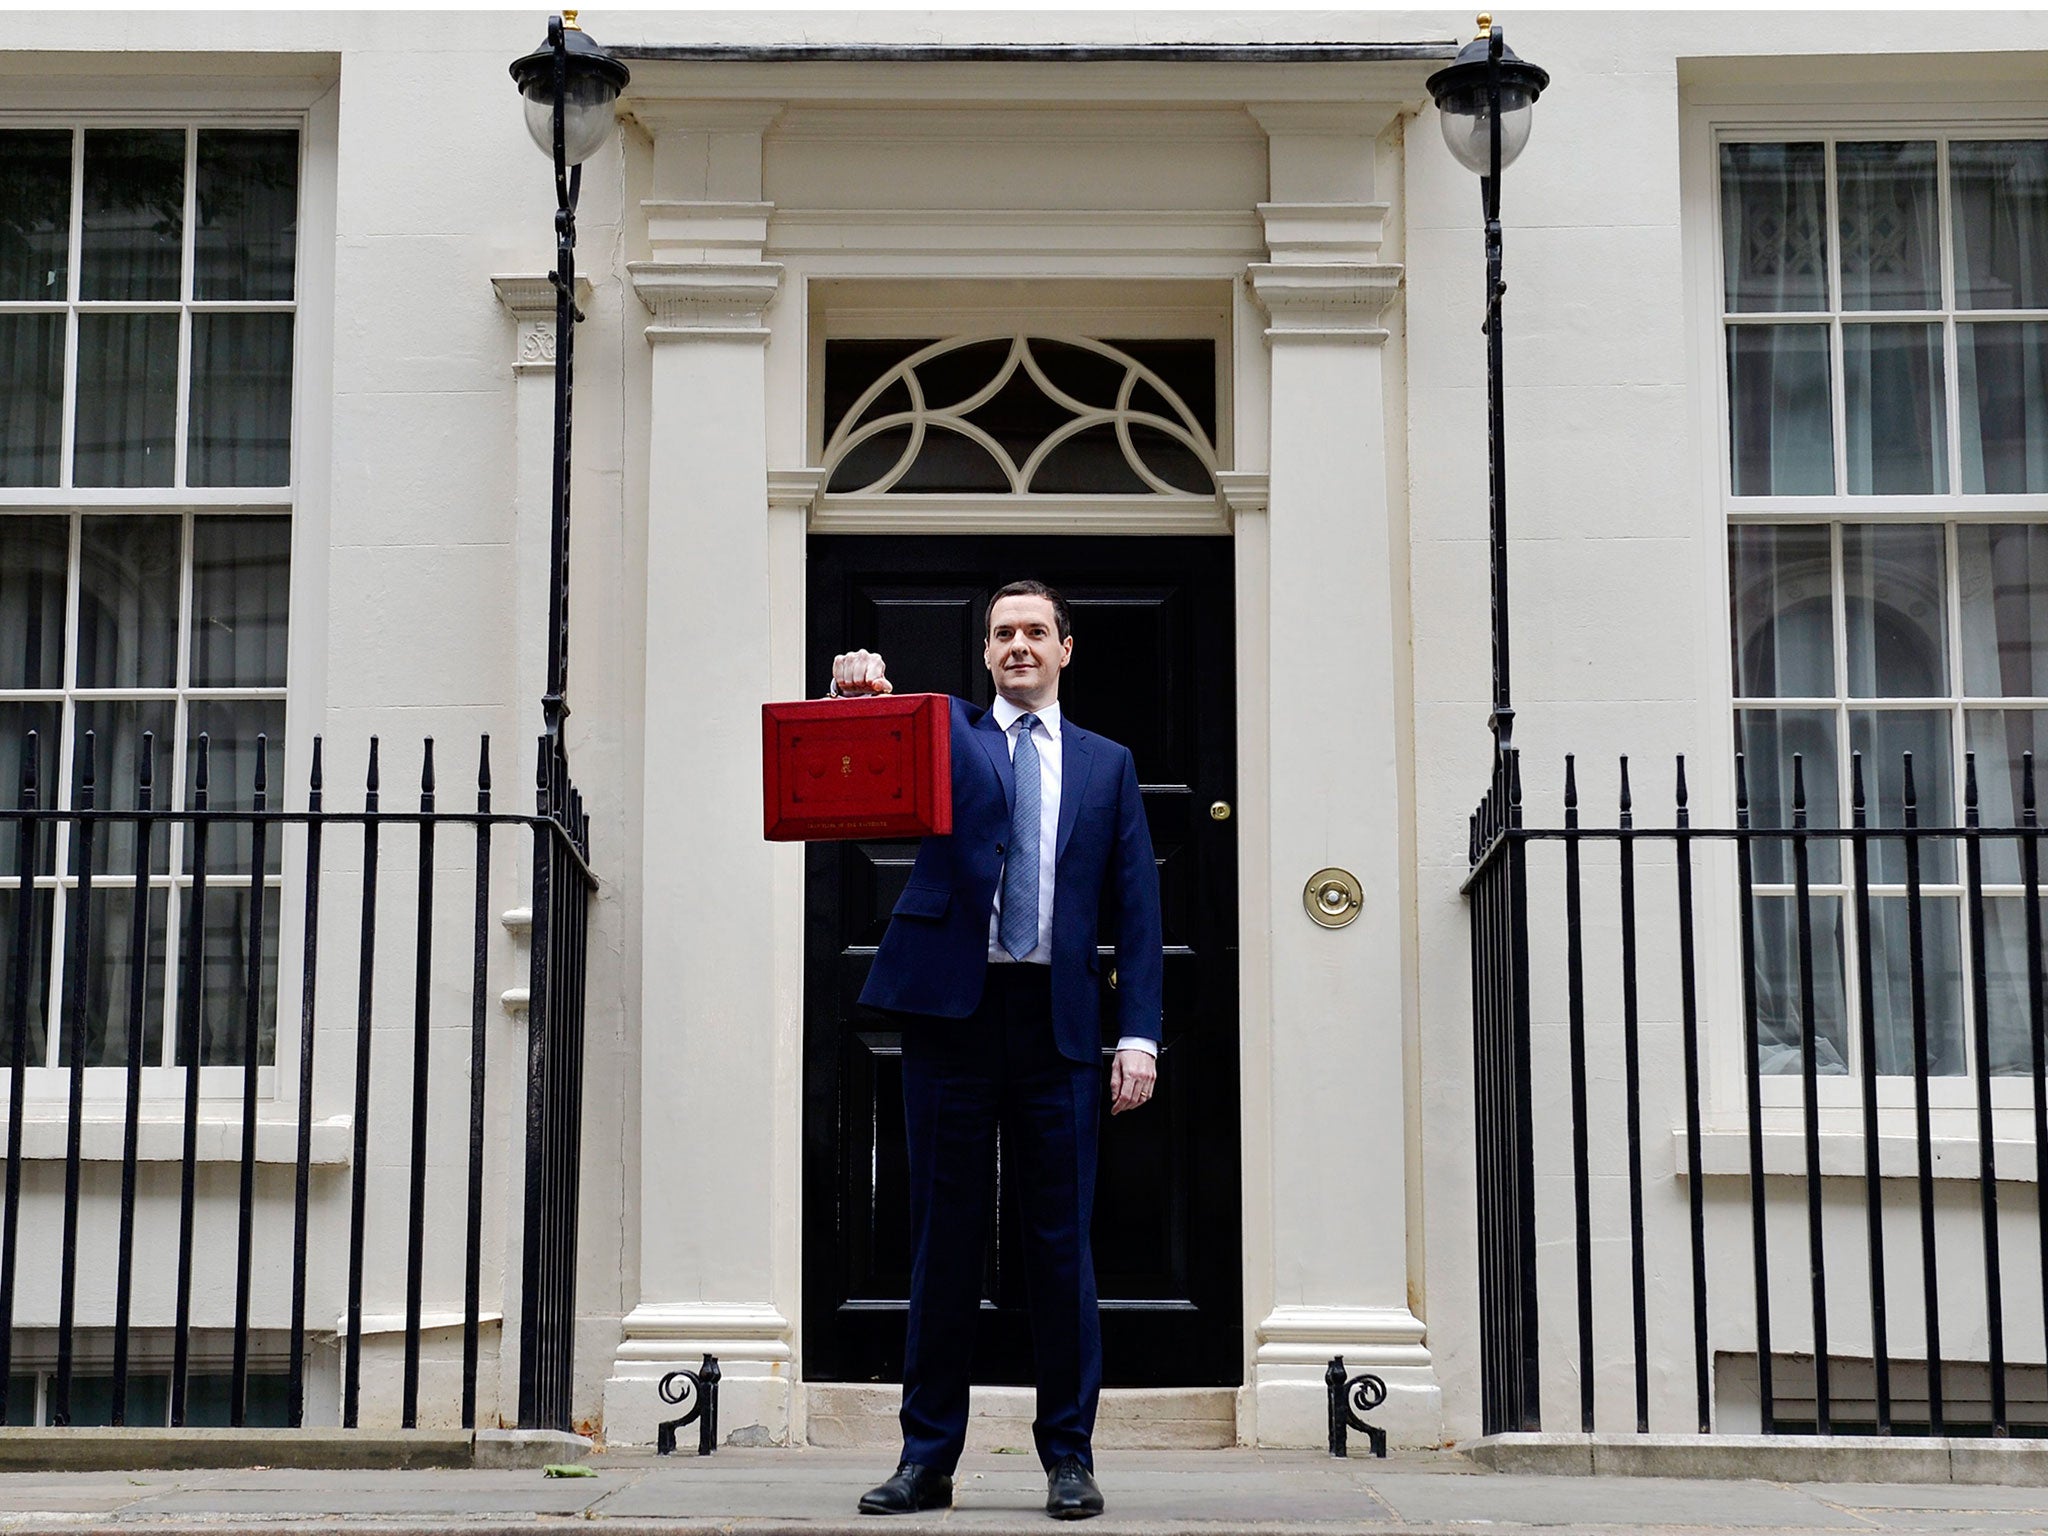 George Osborne holds up the red briefcase outside No 11 Downing Street prior to announcing his budget to parliament in London